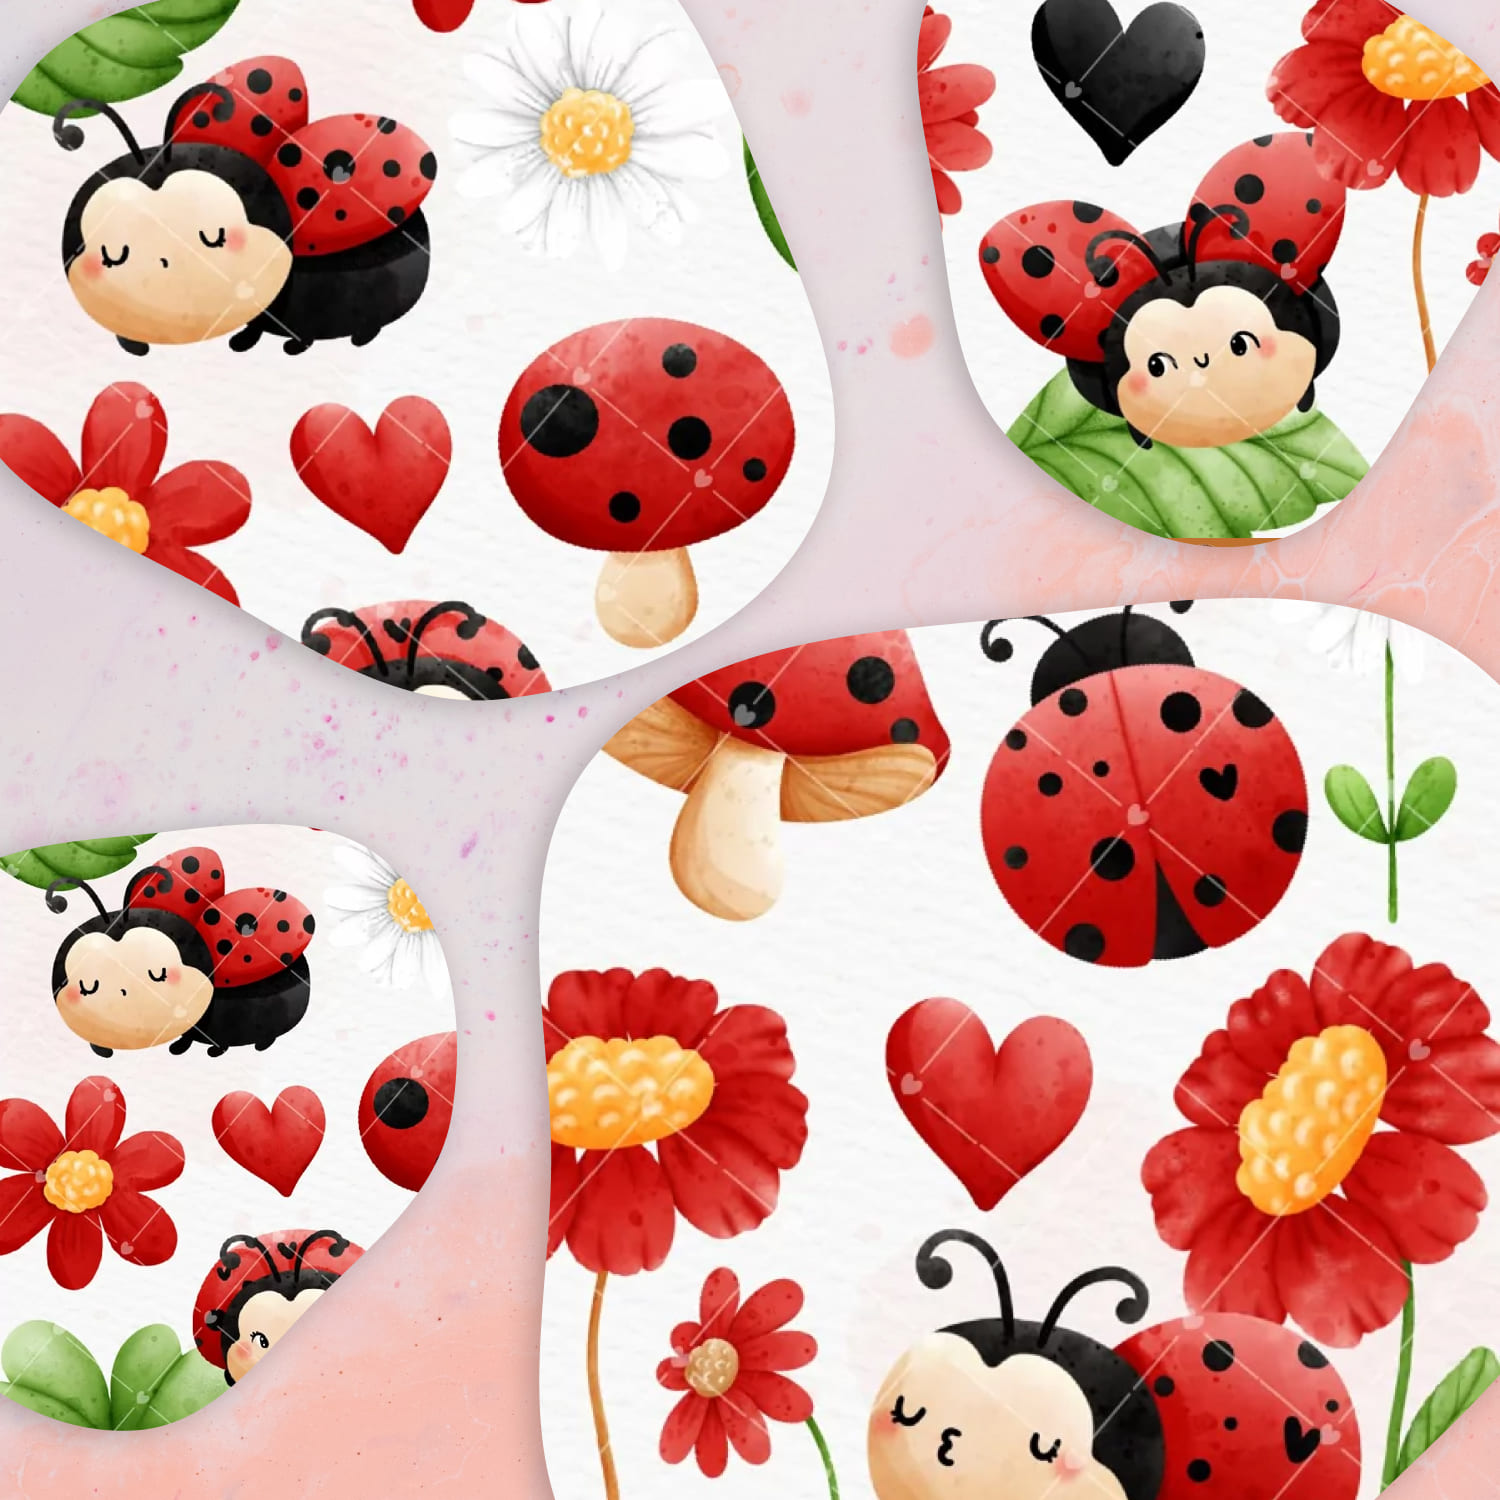 Ladybug clipart Created By Chonnieartwork.